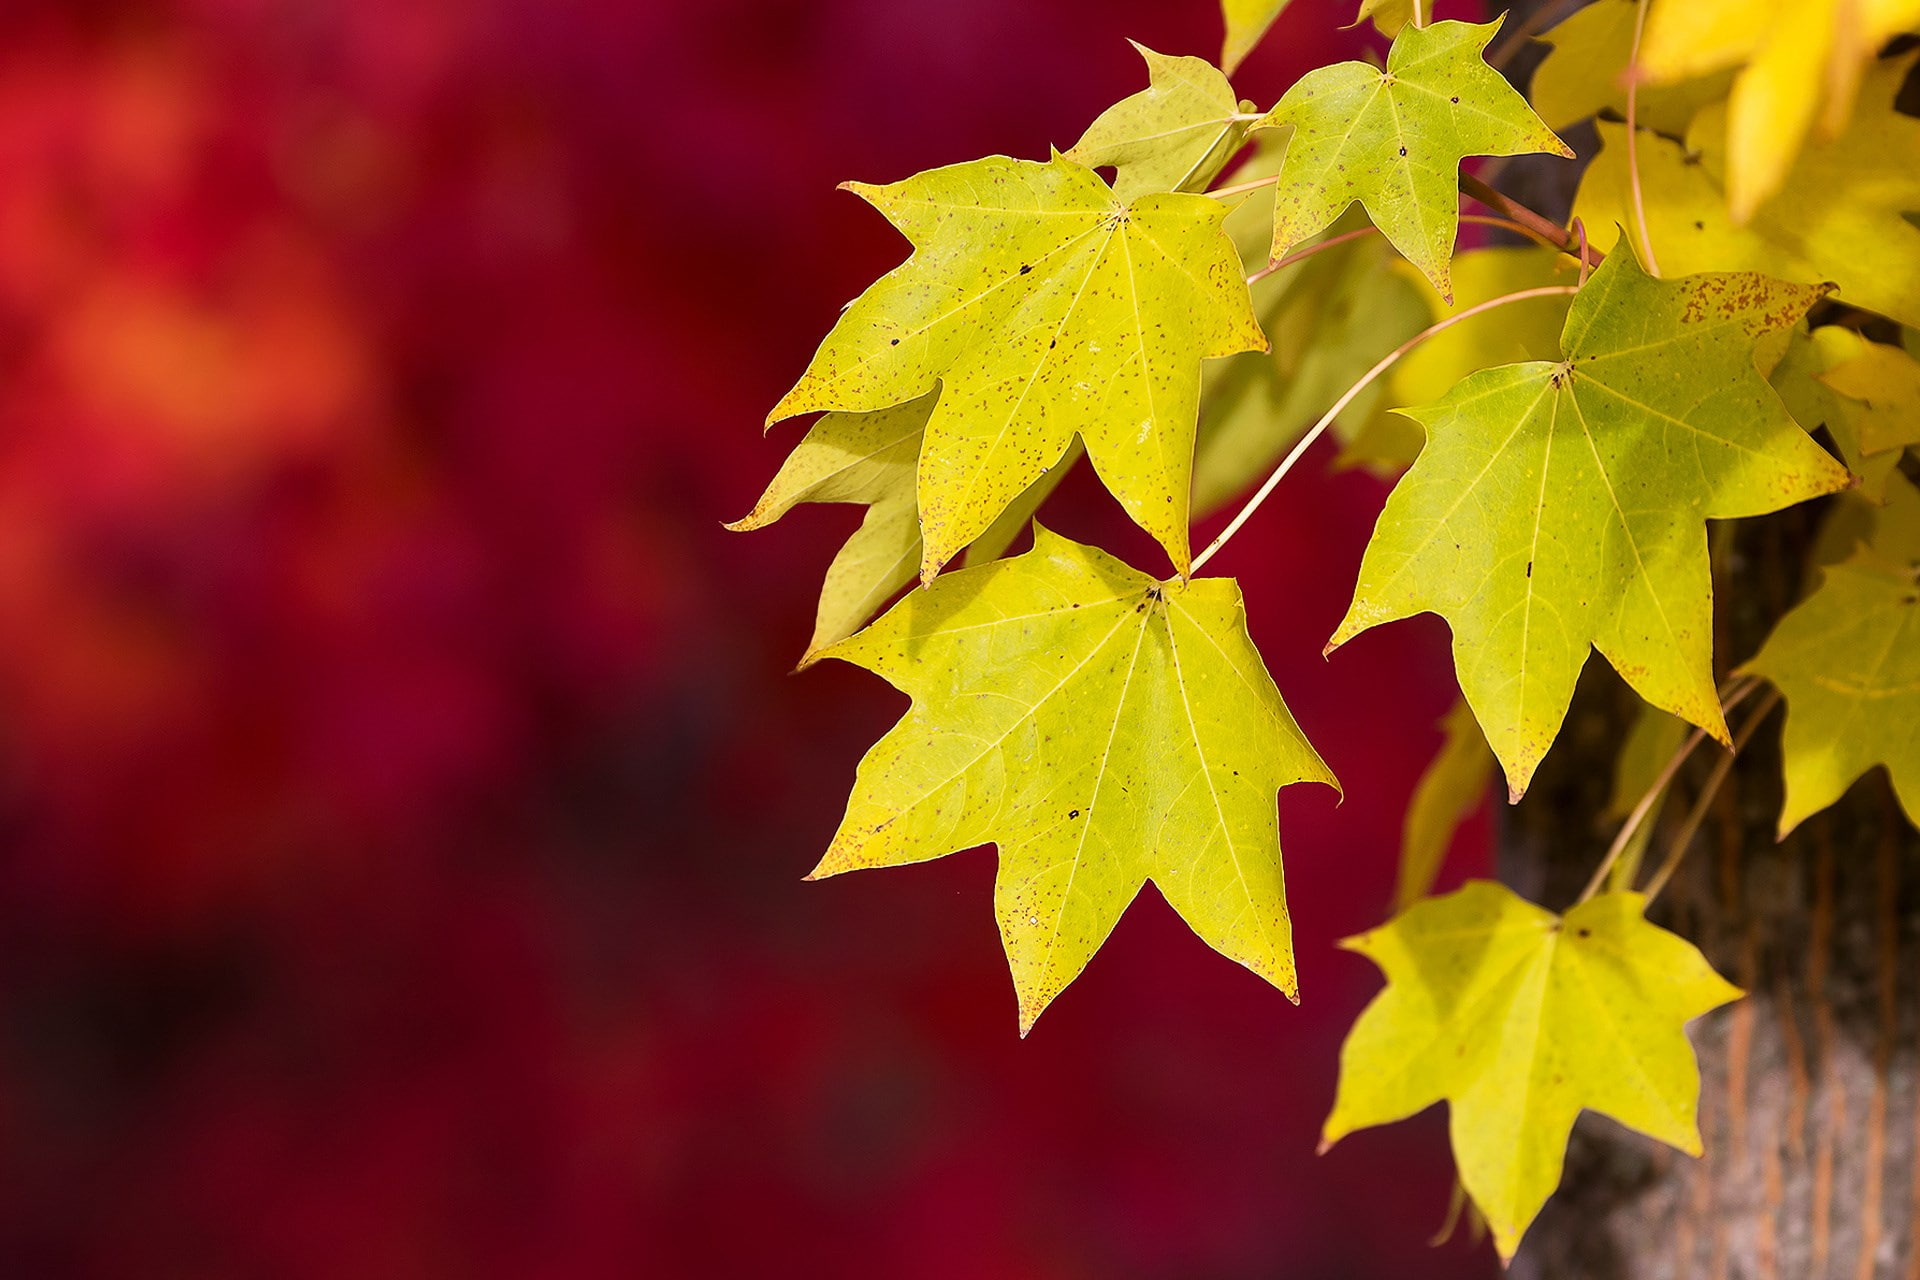 leaf, plant part, yellow, maple leaf, no people, close-up, red